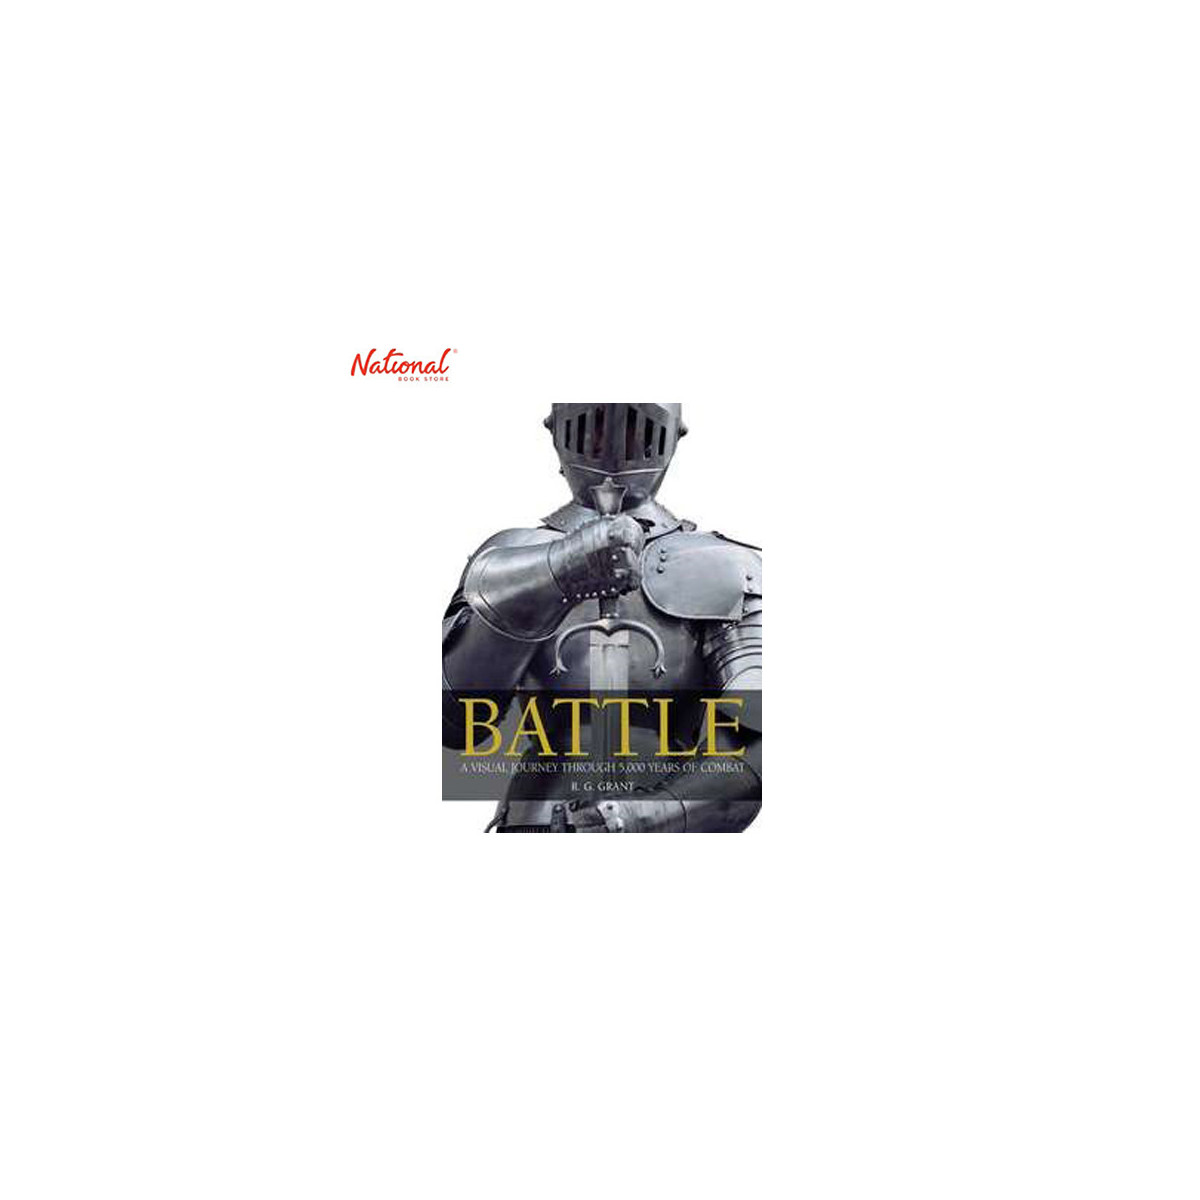 Battle: A Visual Journey Through 5,000 Years of Combat Trade Paperback by R.G. Grant